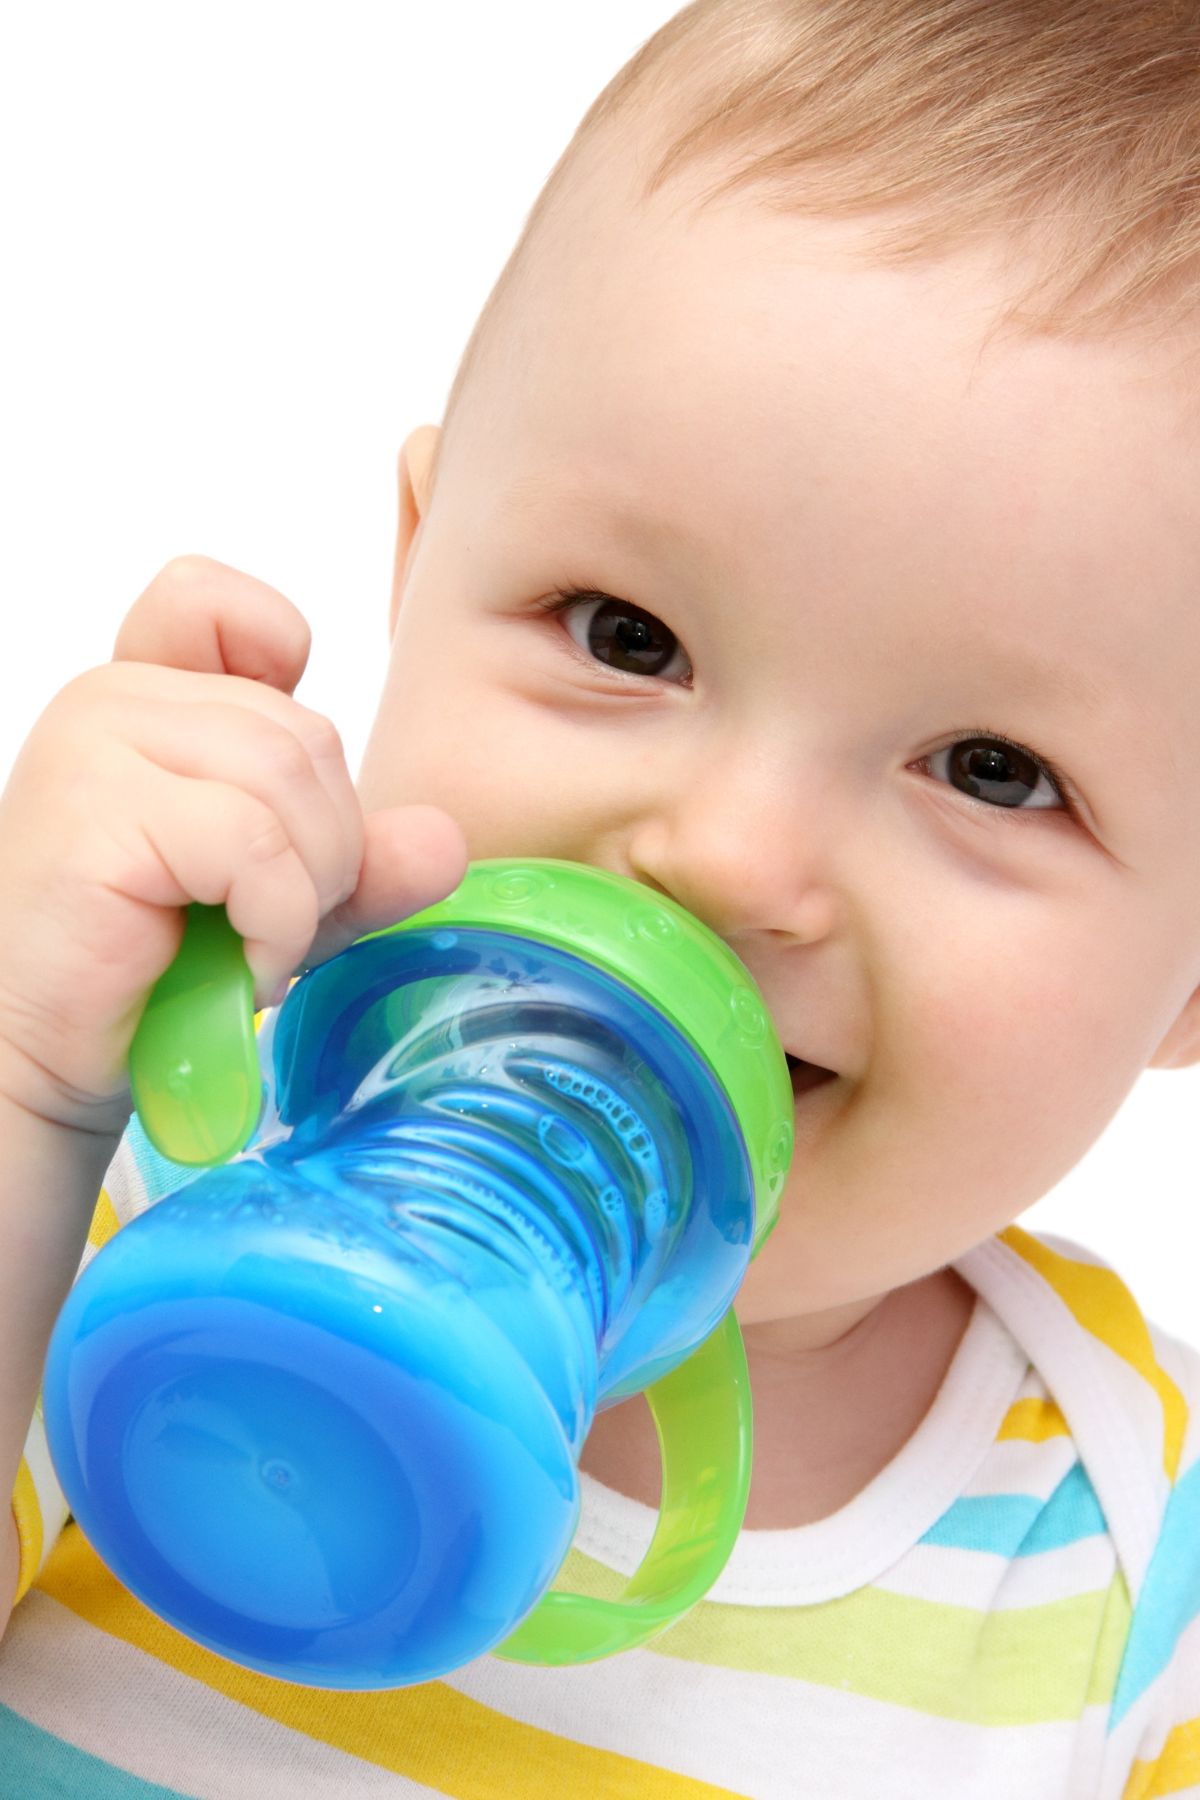 A toddler boy drinks whole milk from a blue and green sippy cup.